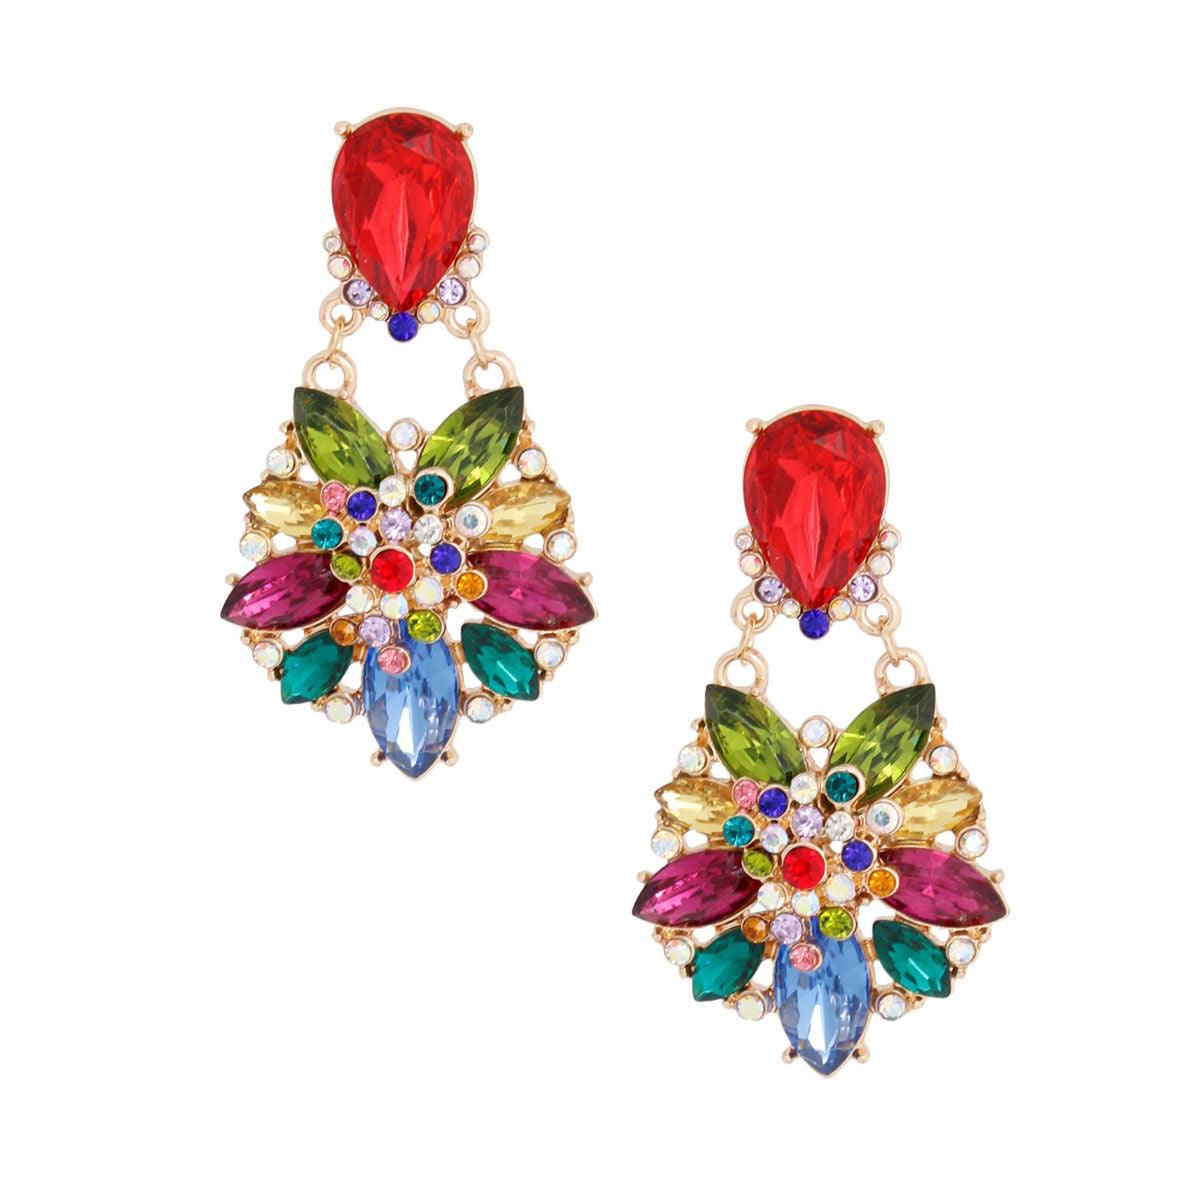 Stunning Multicolor Drop Dangle Earrings: Add Sparkle Today!